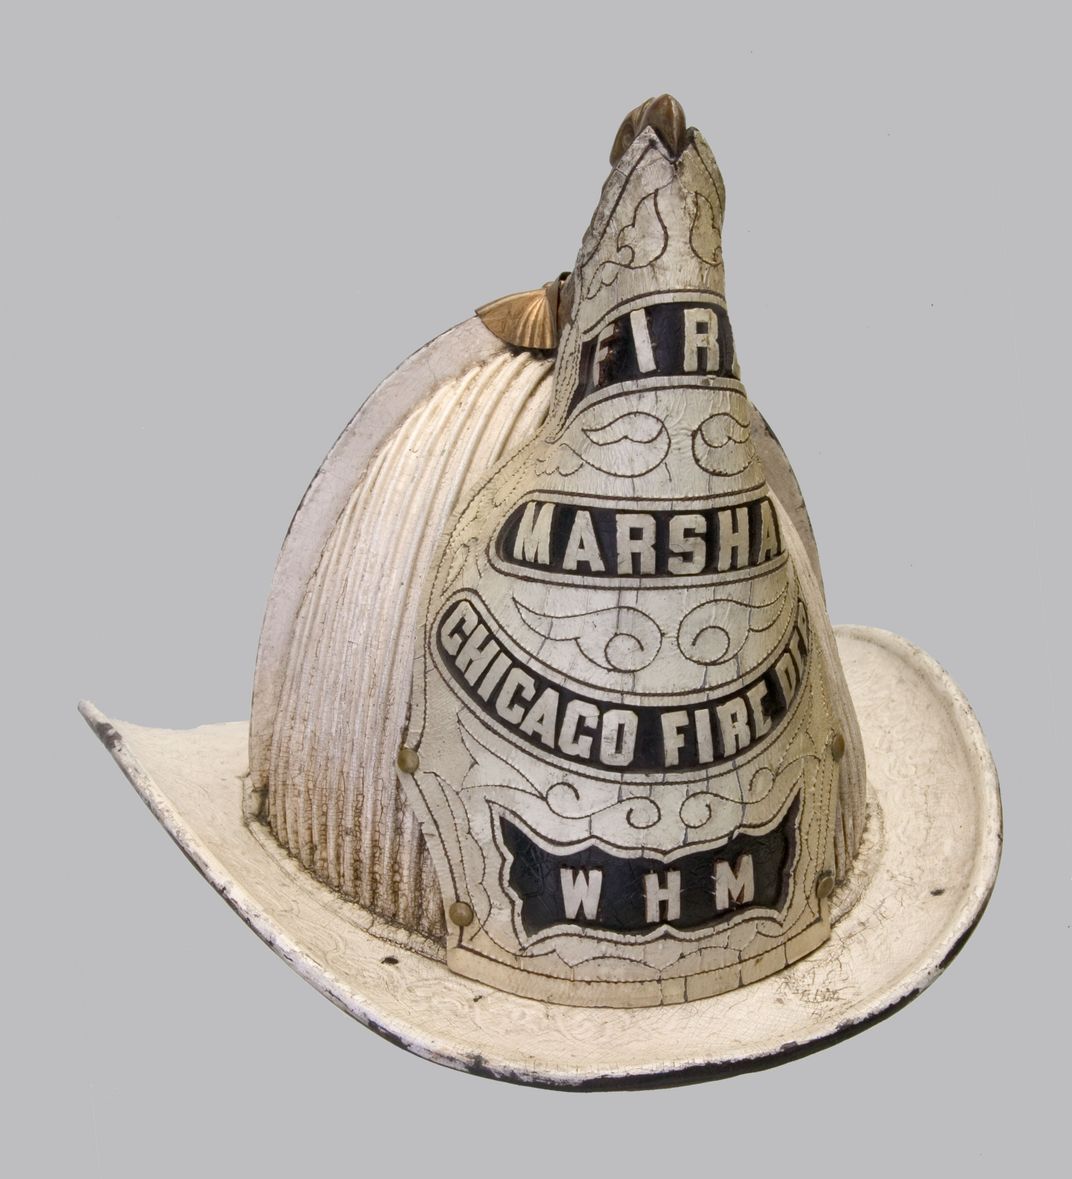 A Fire marshall's white peaked hat